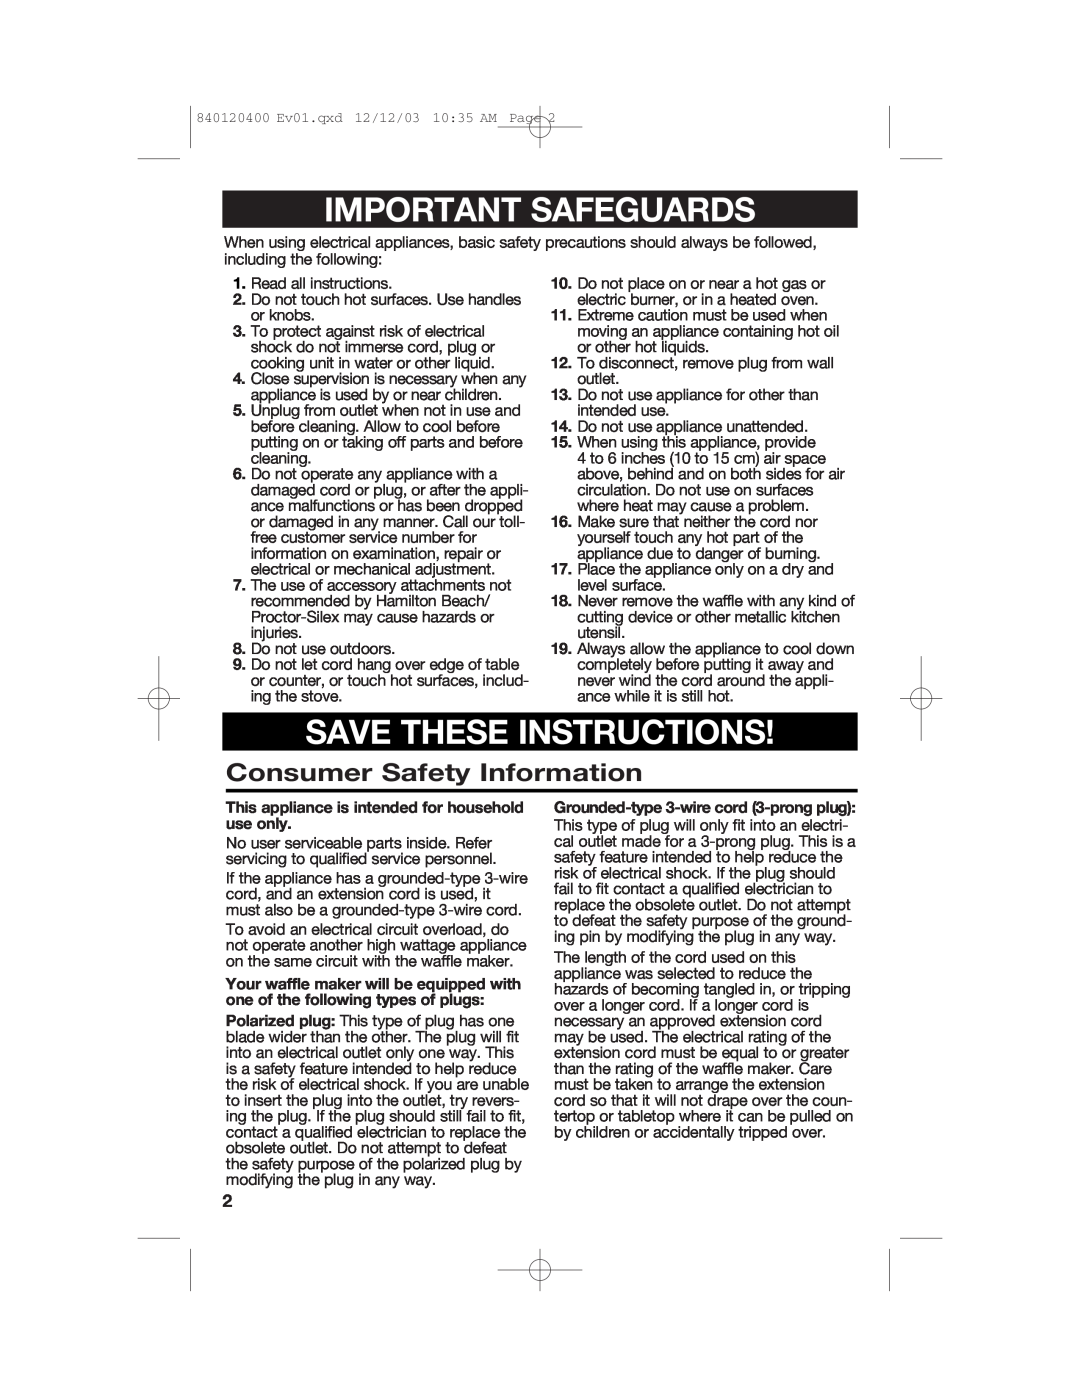 Hamilton Beach 26291 manual Important Safeguards, Save These Instructions, Consumer Safety Information 